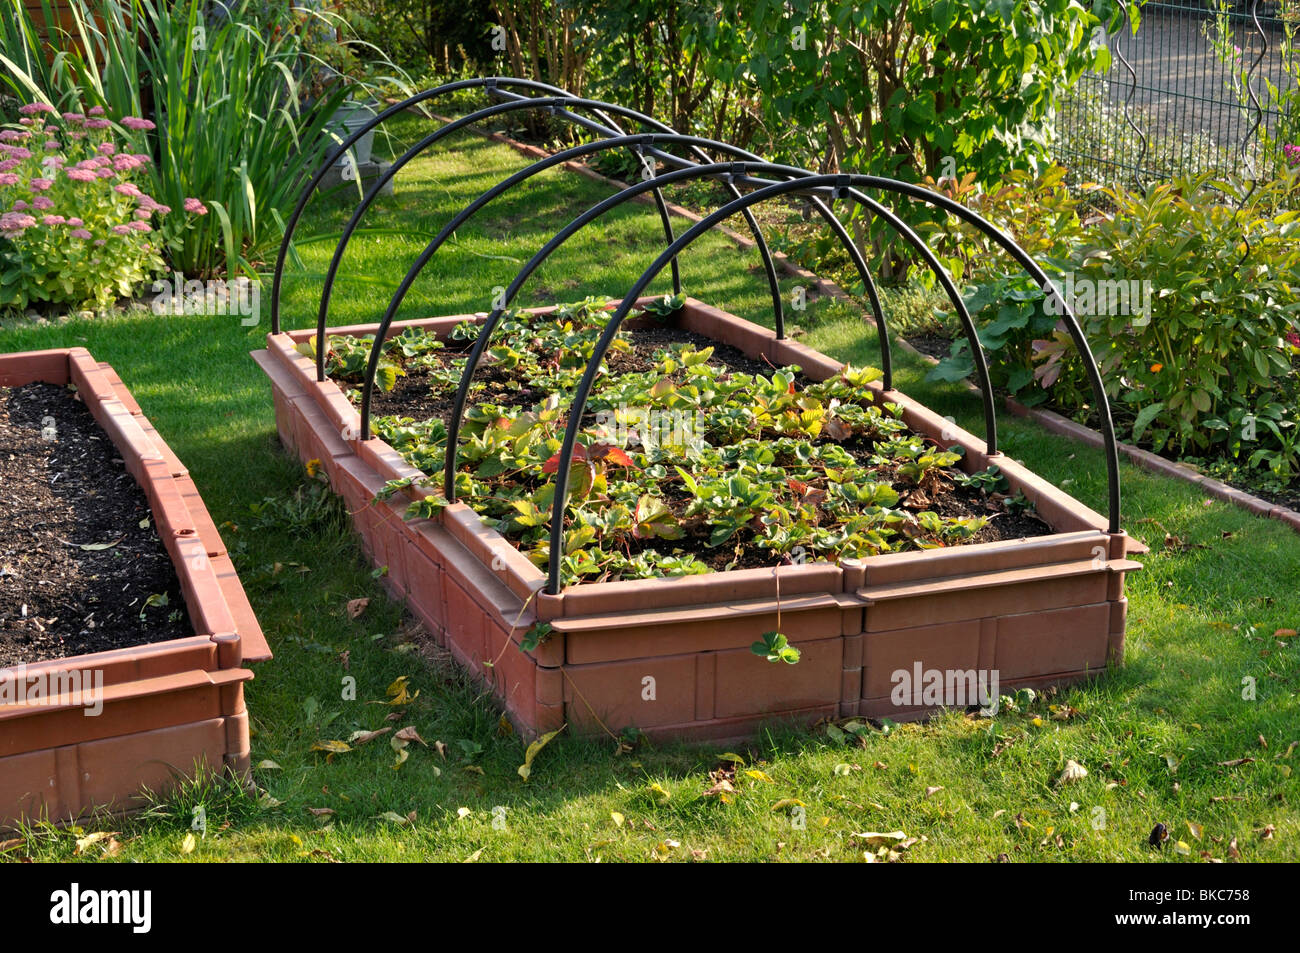 Strawberry Raised Bed Stock Photos Strawberry Raised Bed Stock